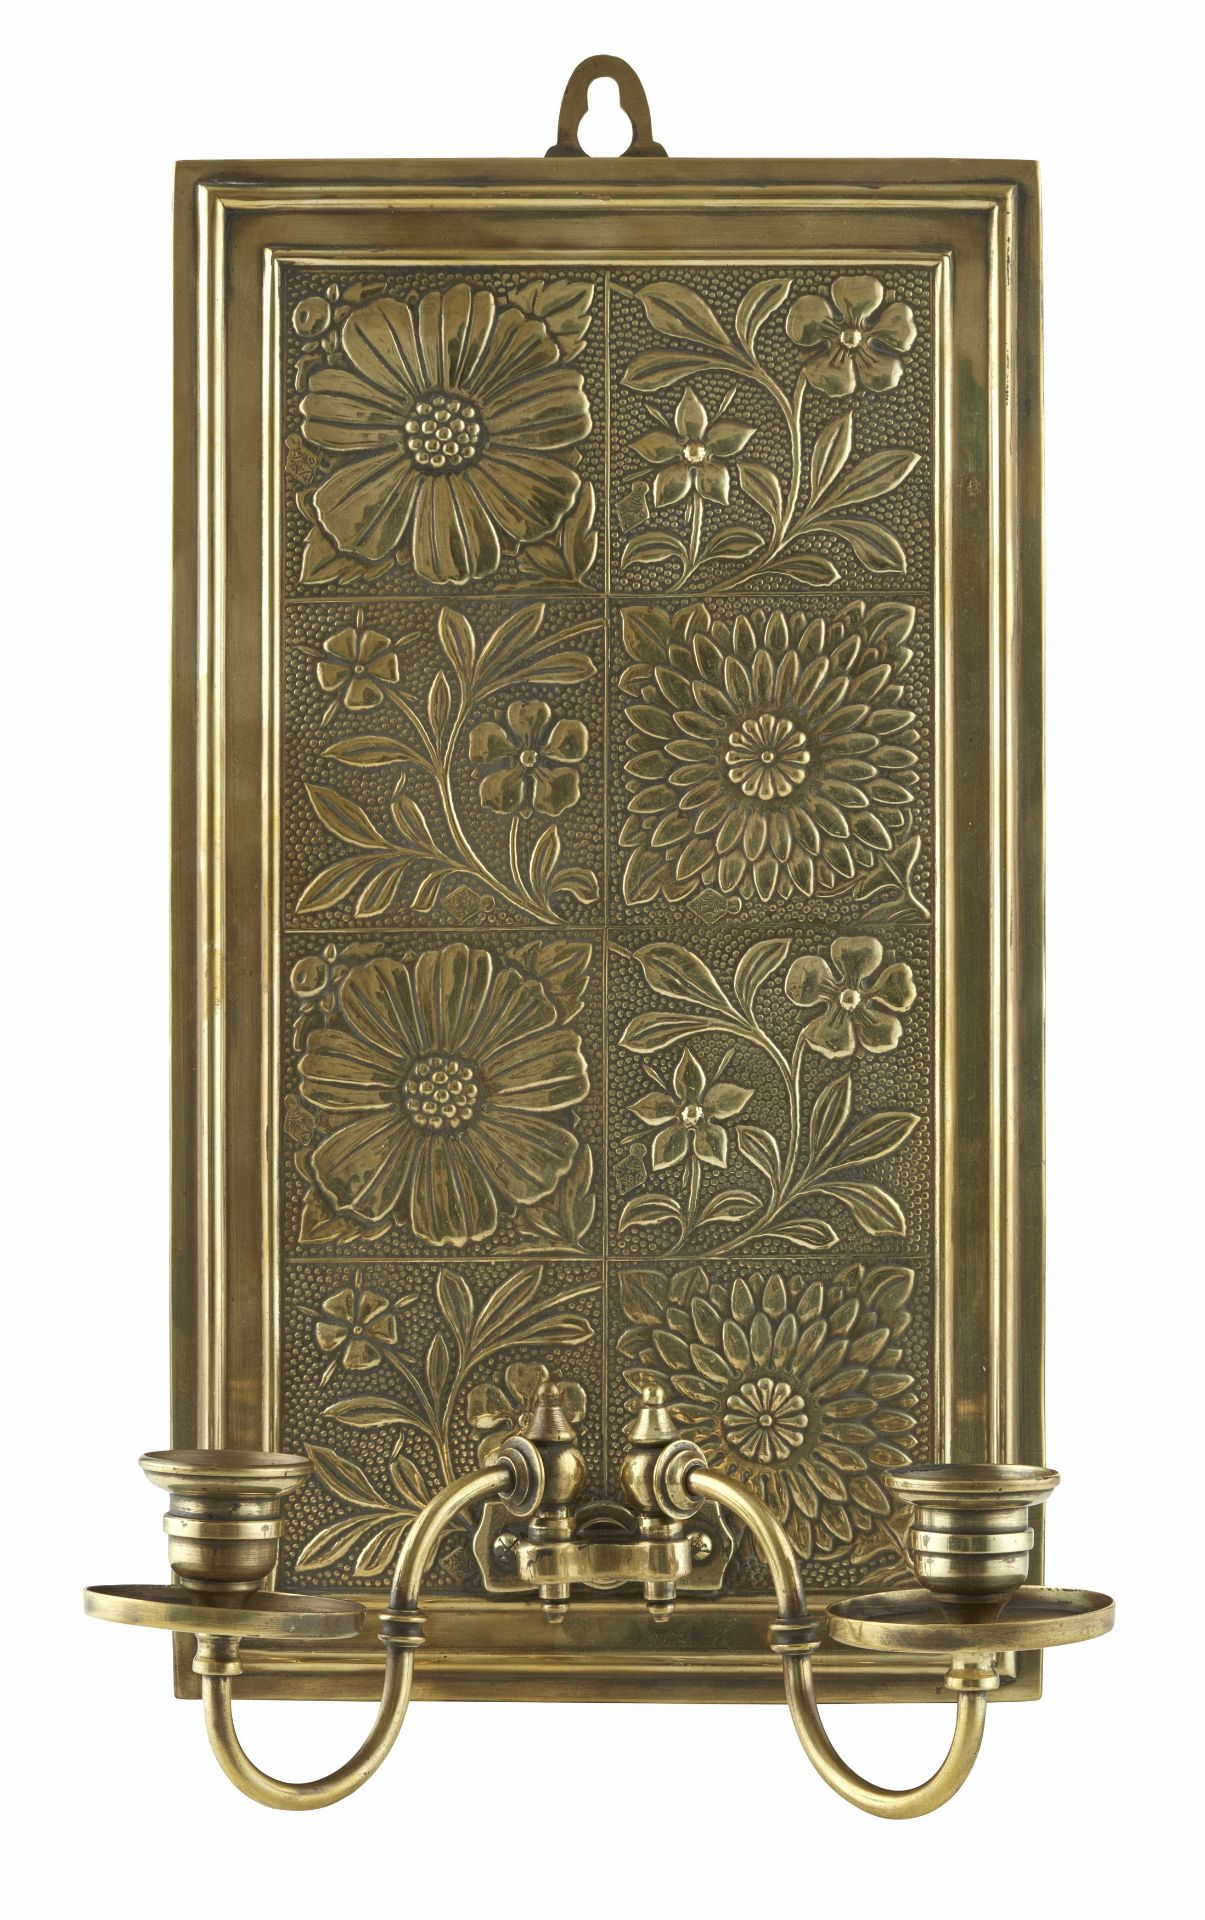 MANNER OF BRUCE J. TALBERT PAIR OF AESTHETIC MOVEMENT WALL SCONCES, DATED 1878 - Image 3 of 3